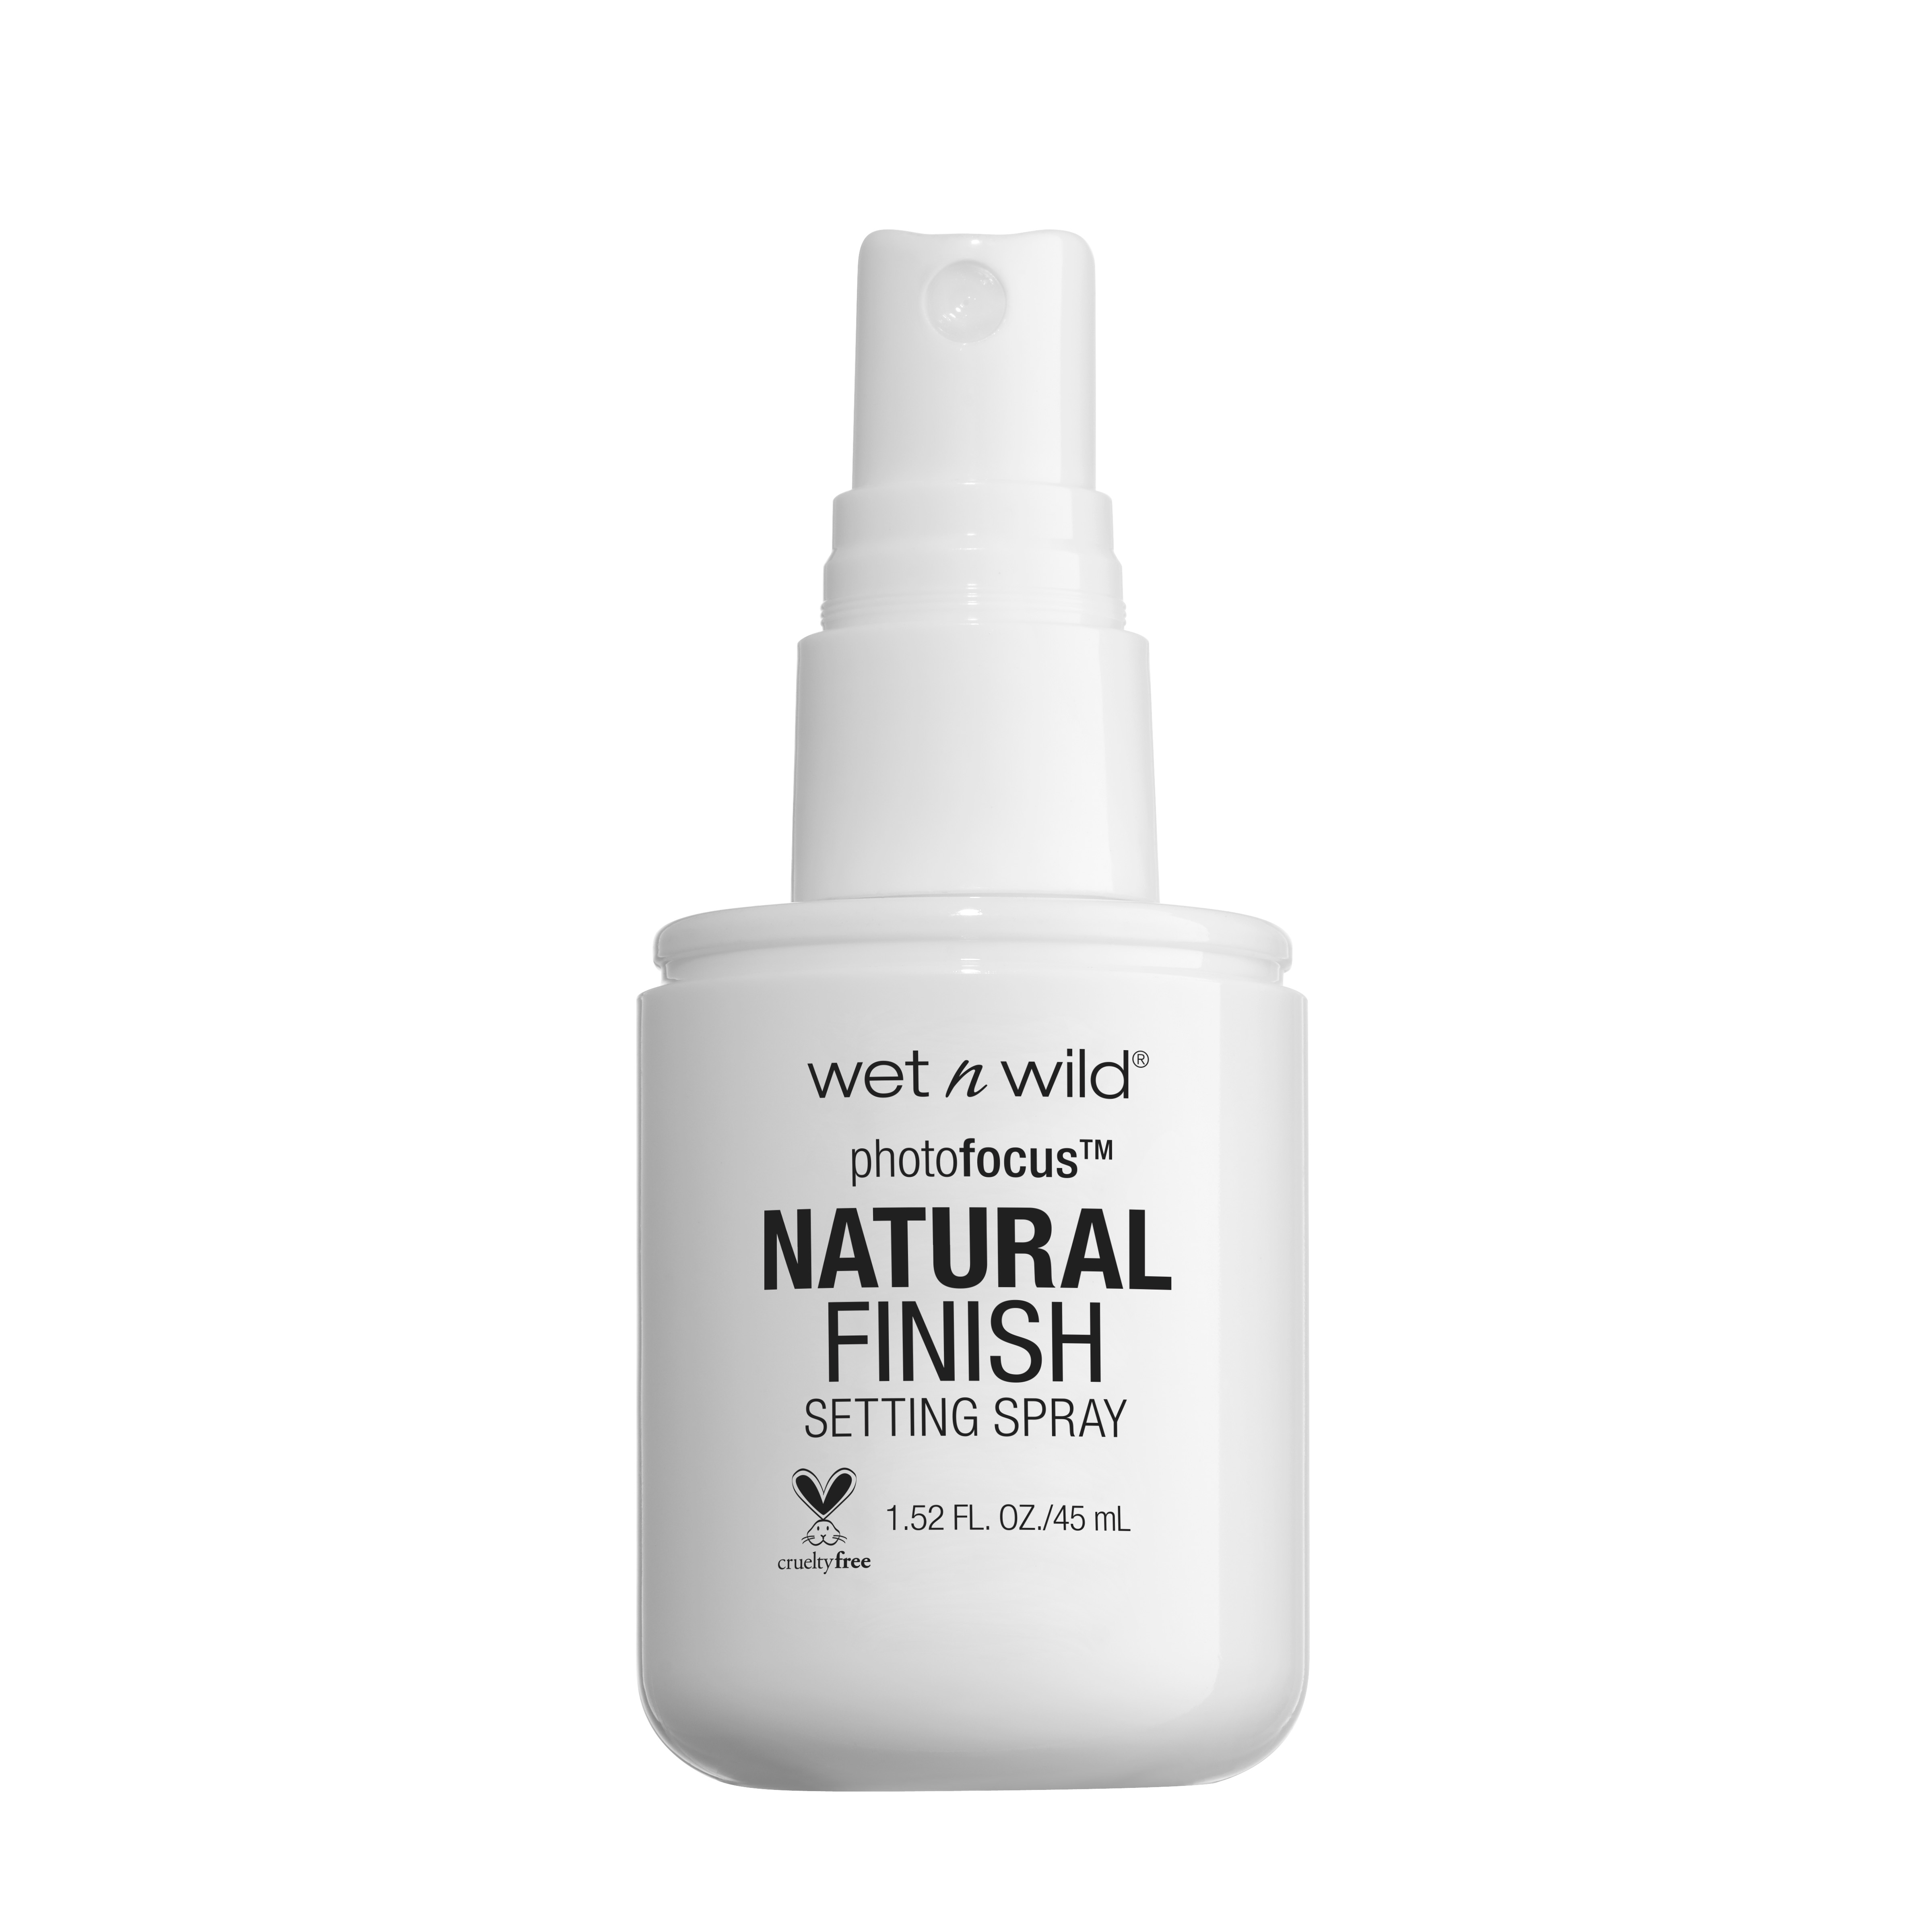 wet n wild Photo Focus Natural Finish Setting Spray, Seal the Deal - image 2 of 4